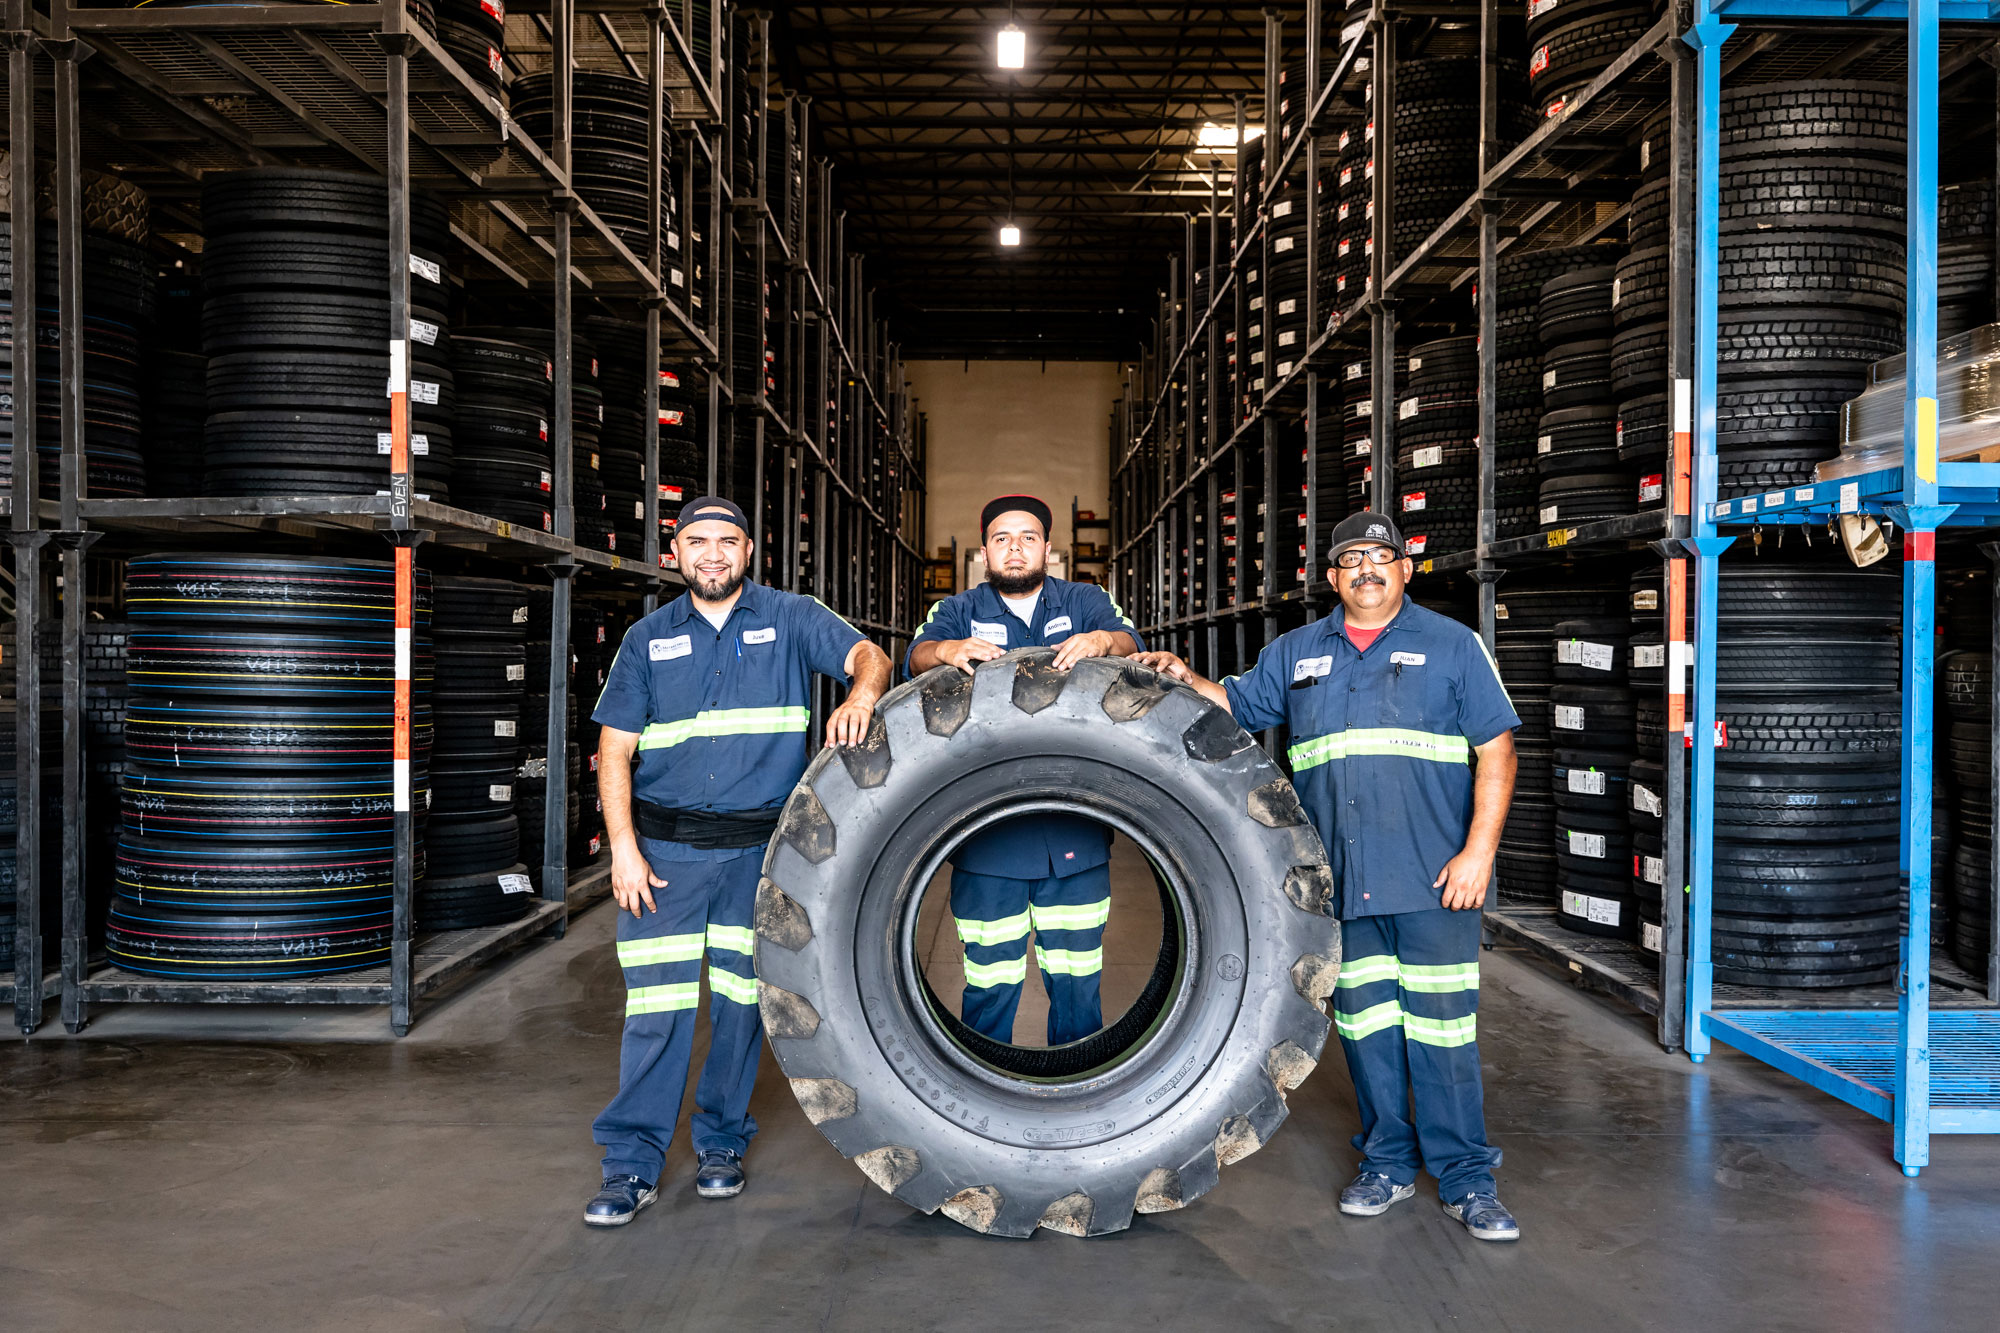 East Bay Tire employees standing with a large tire in a warehouse aisle